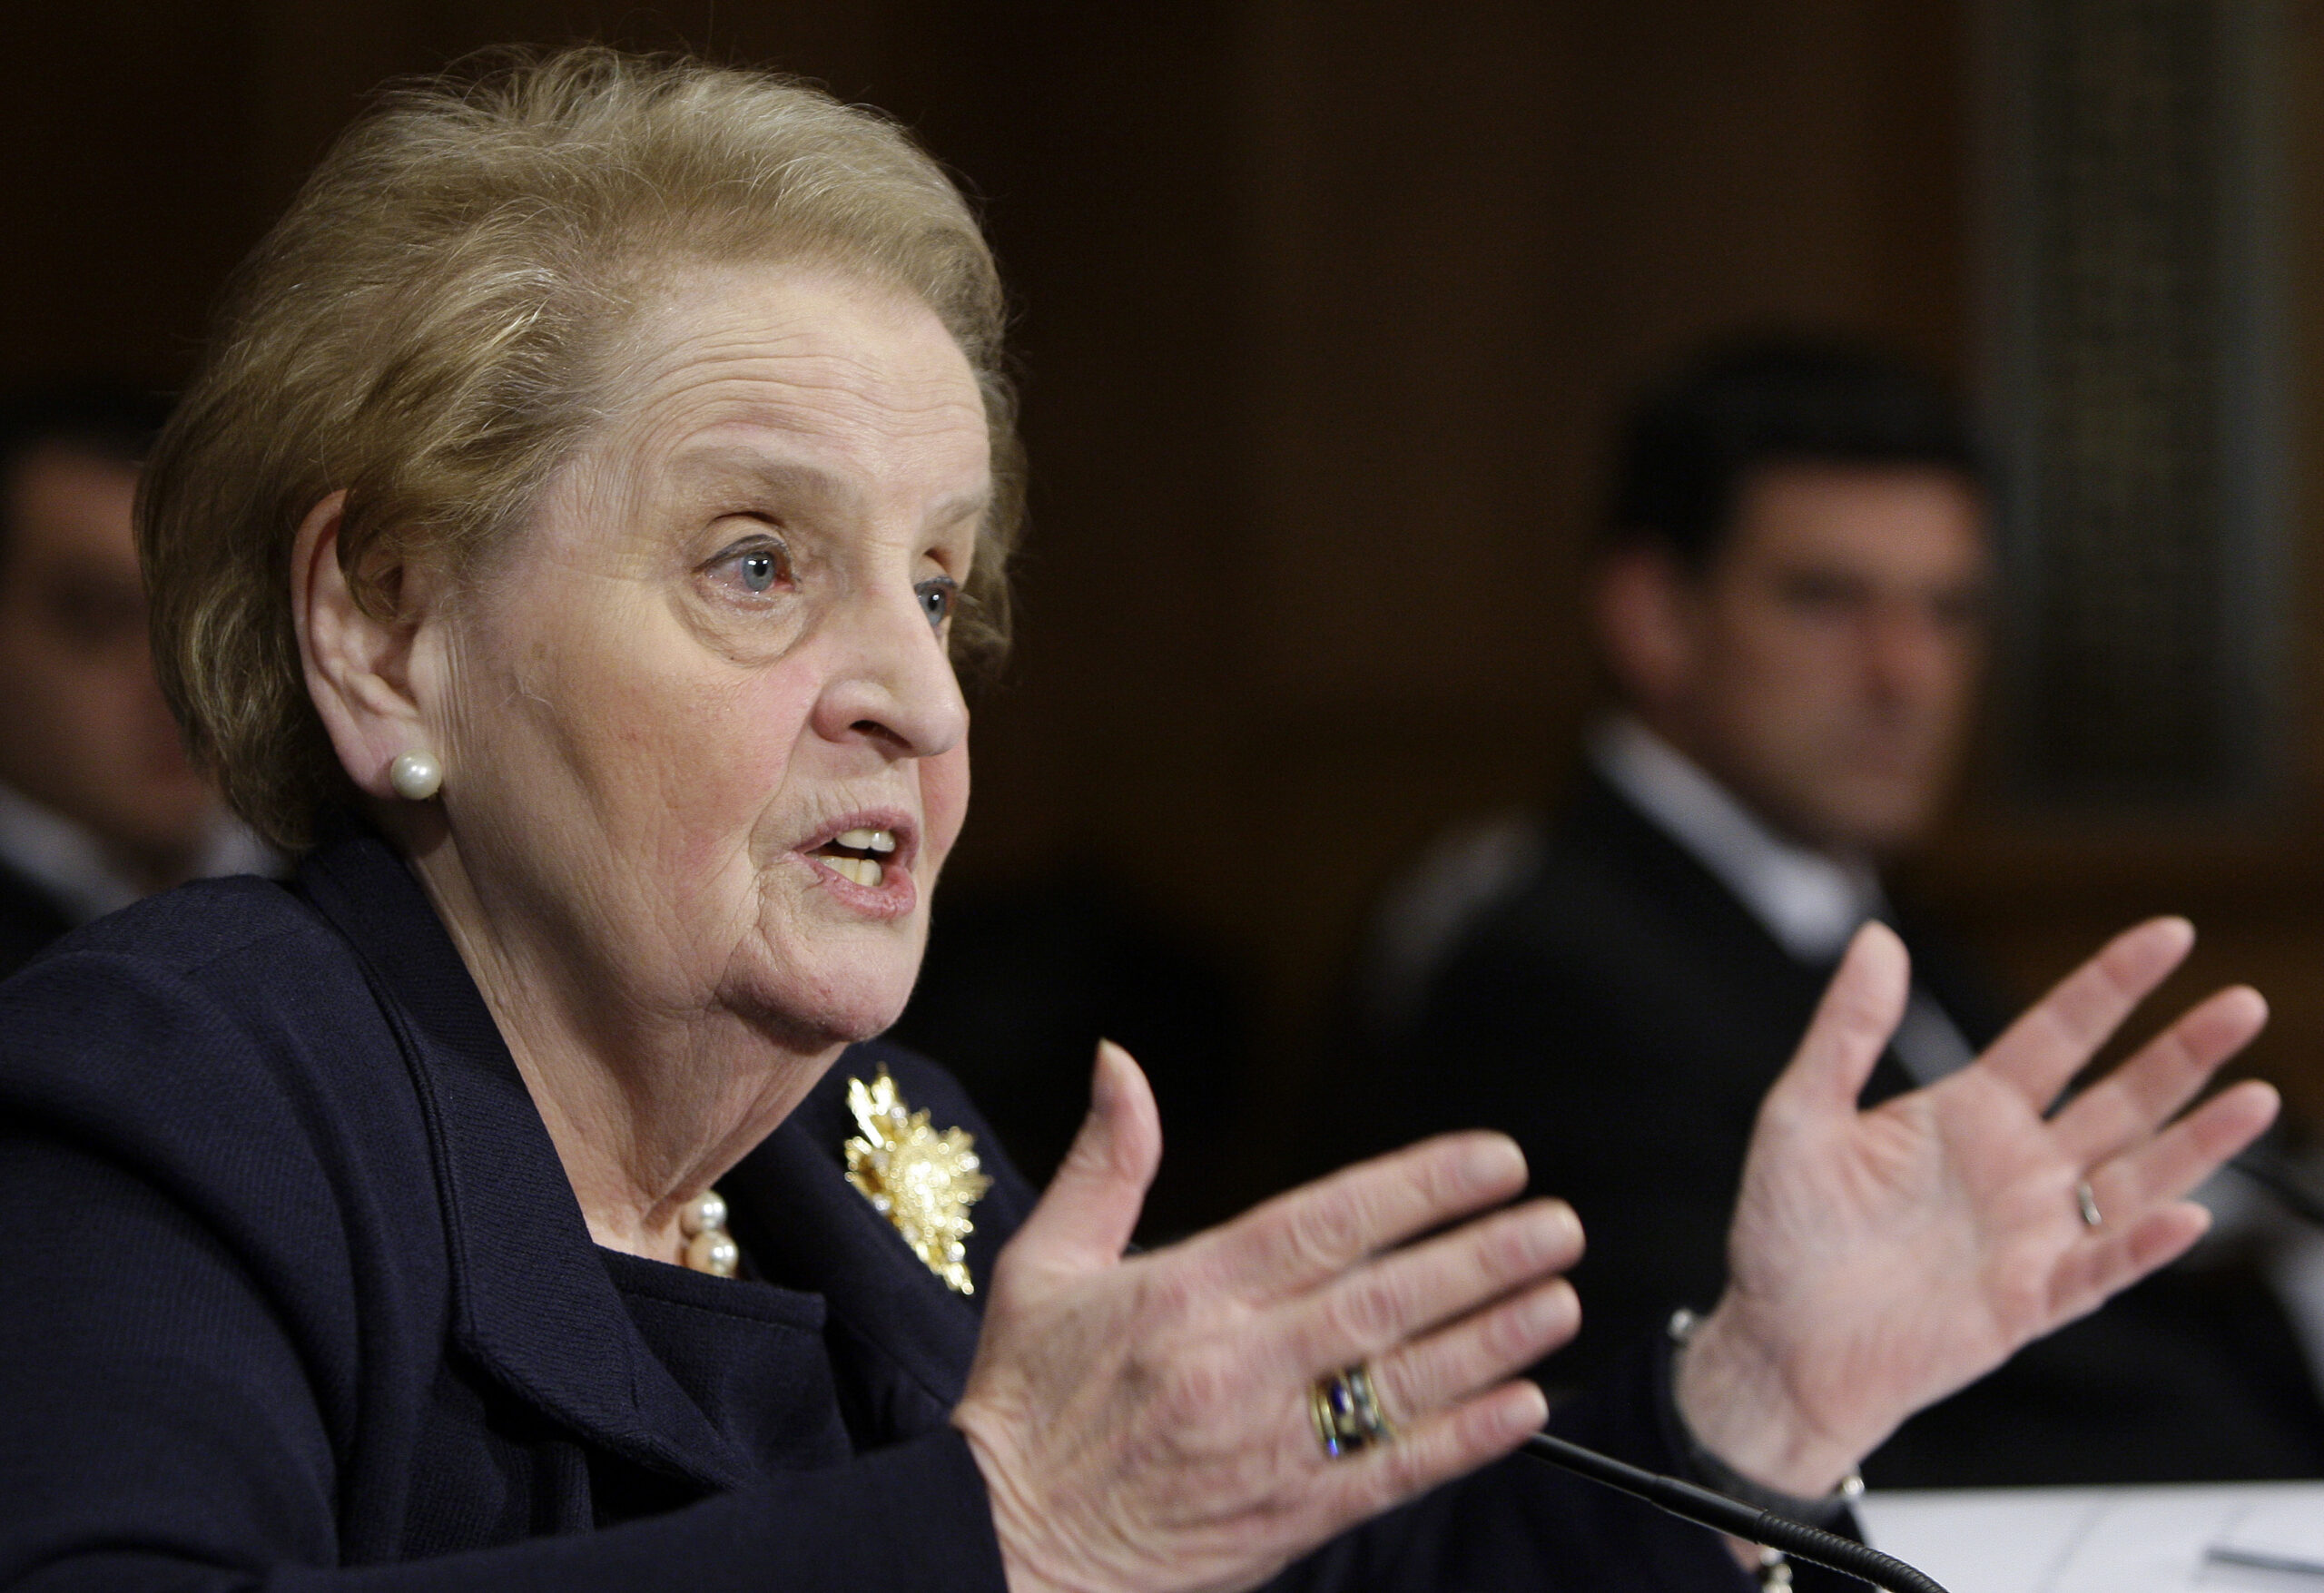 FILE - Former Secretary of State Madeleine Albright testifies on Capitol Hill in Washington, on Oct. 22, 2009 before the Senate Foreign Relations Committee hearing on NATO. Albright has died of cancer, her family said Wednesday, March 23, 2022. (AP Photo/Haraz N. Ghanbari, File)